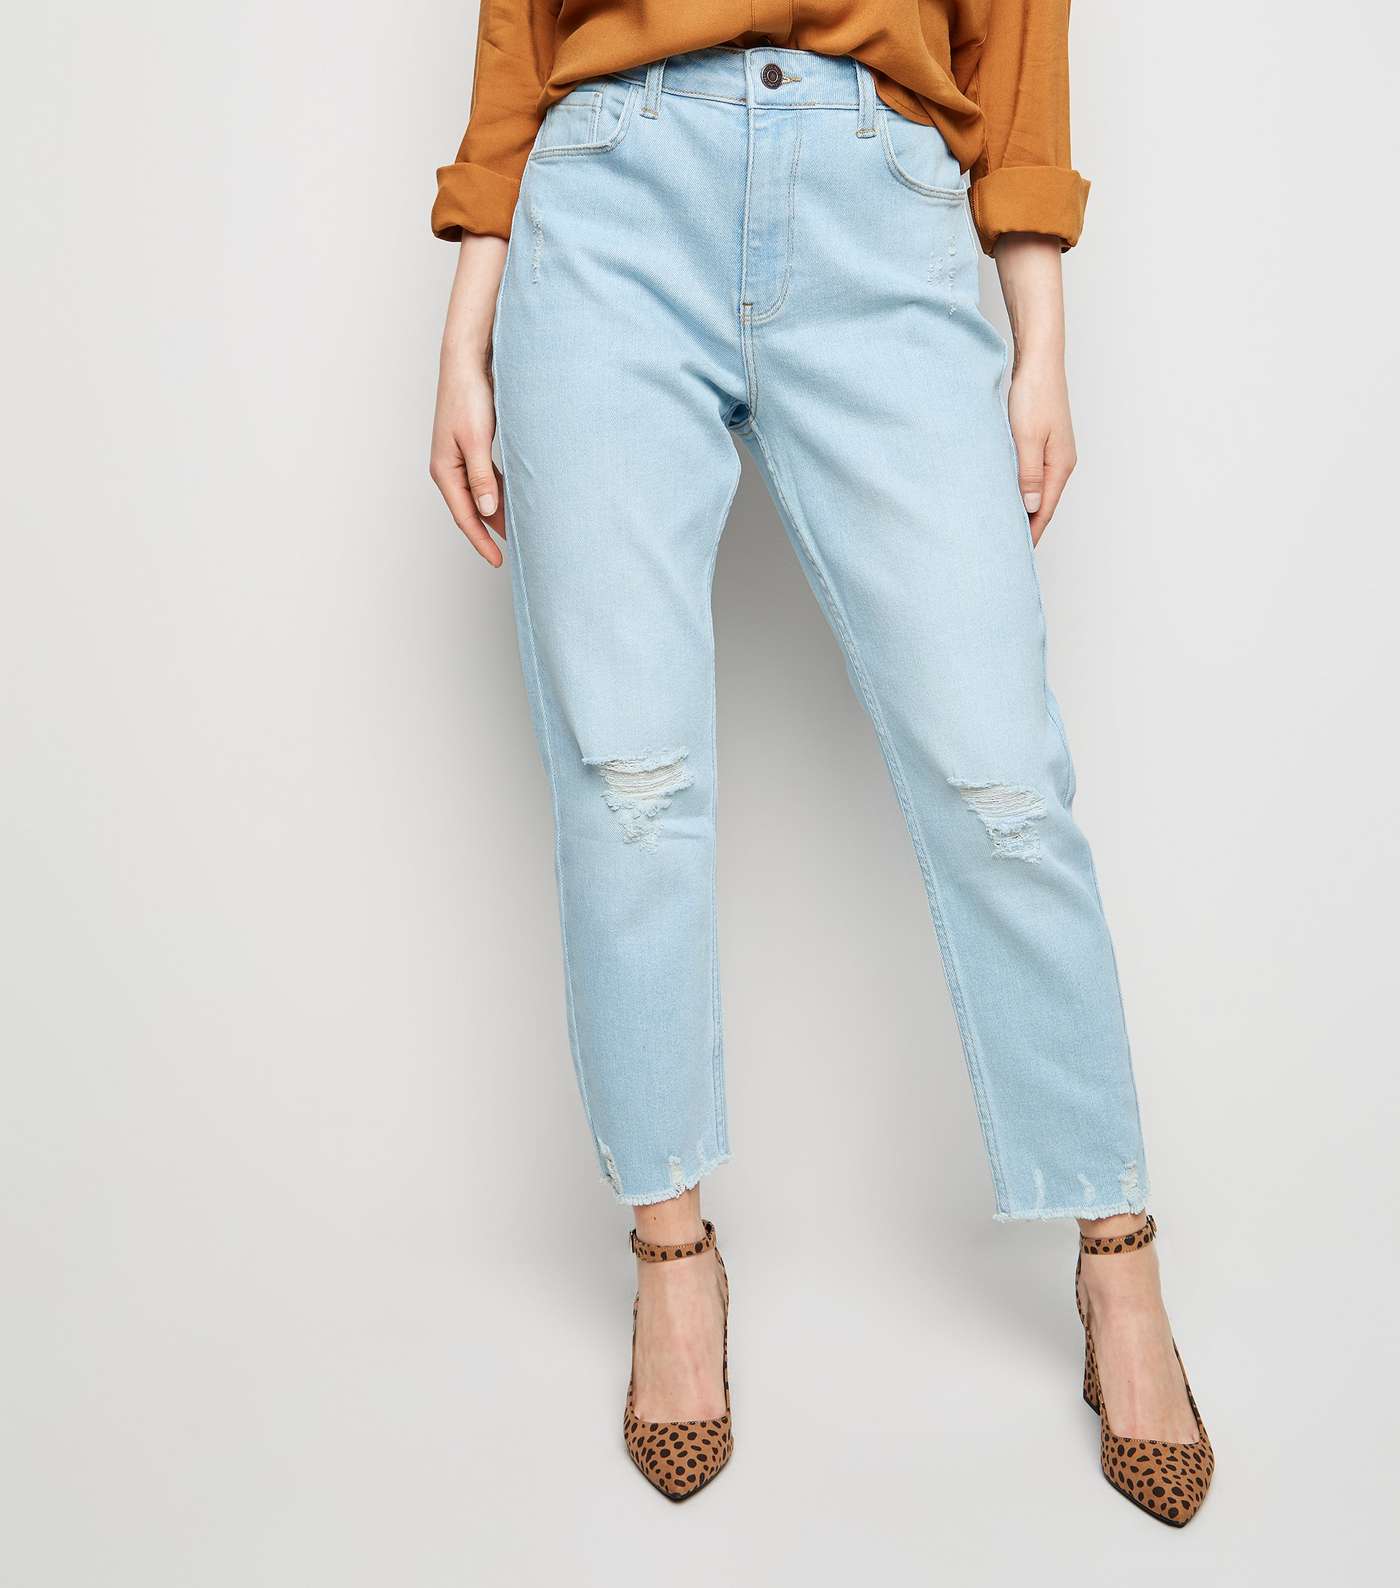 Petite Pale Blue Bleach Wash Ripped Mom Jeans  Image 2